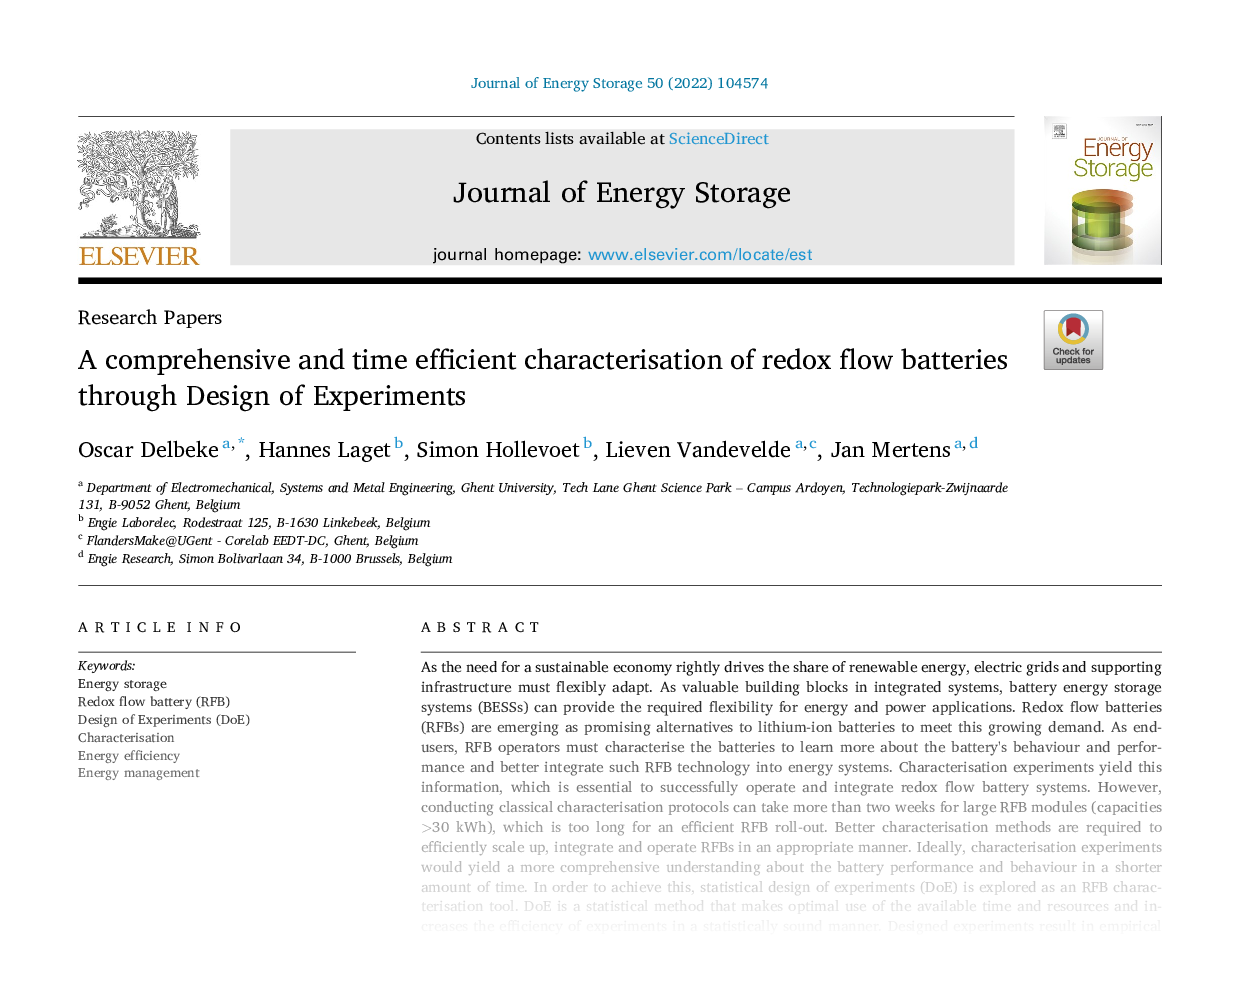 A comprehensive and time efficient characterisation of redox flow batteries through Design of Experiments